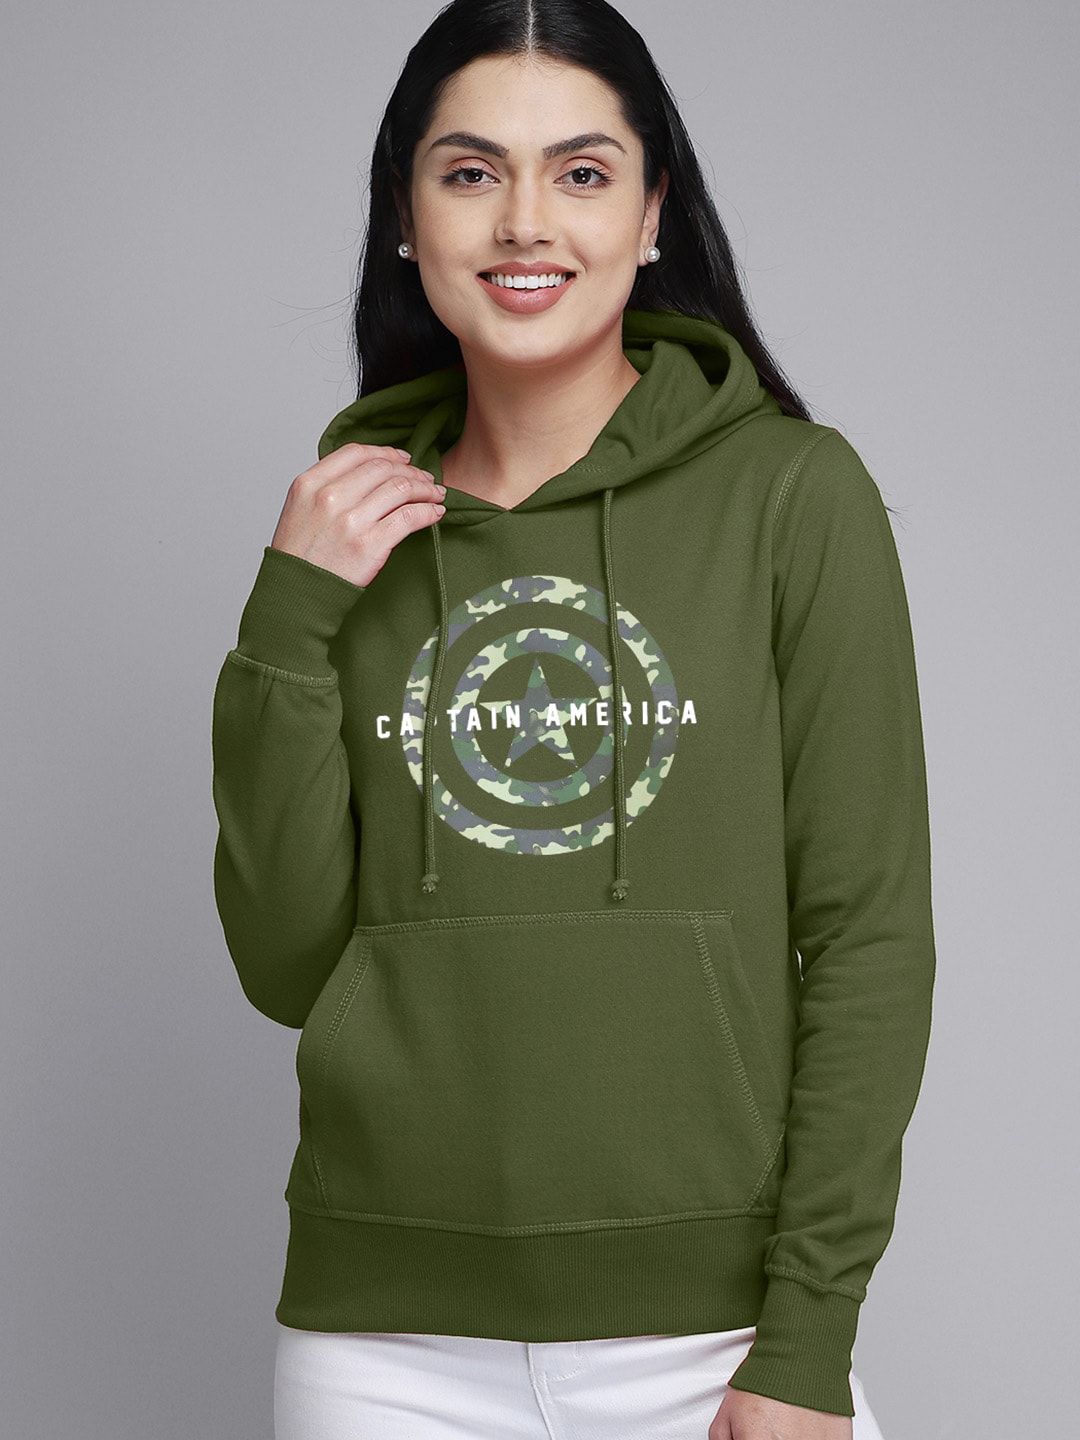 Free Authority Captain America Women Olive Green Printed Hooded Sweatshirt Price in India